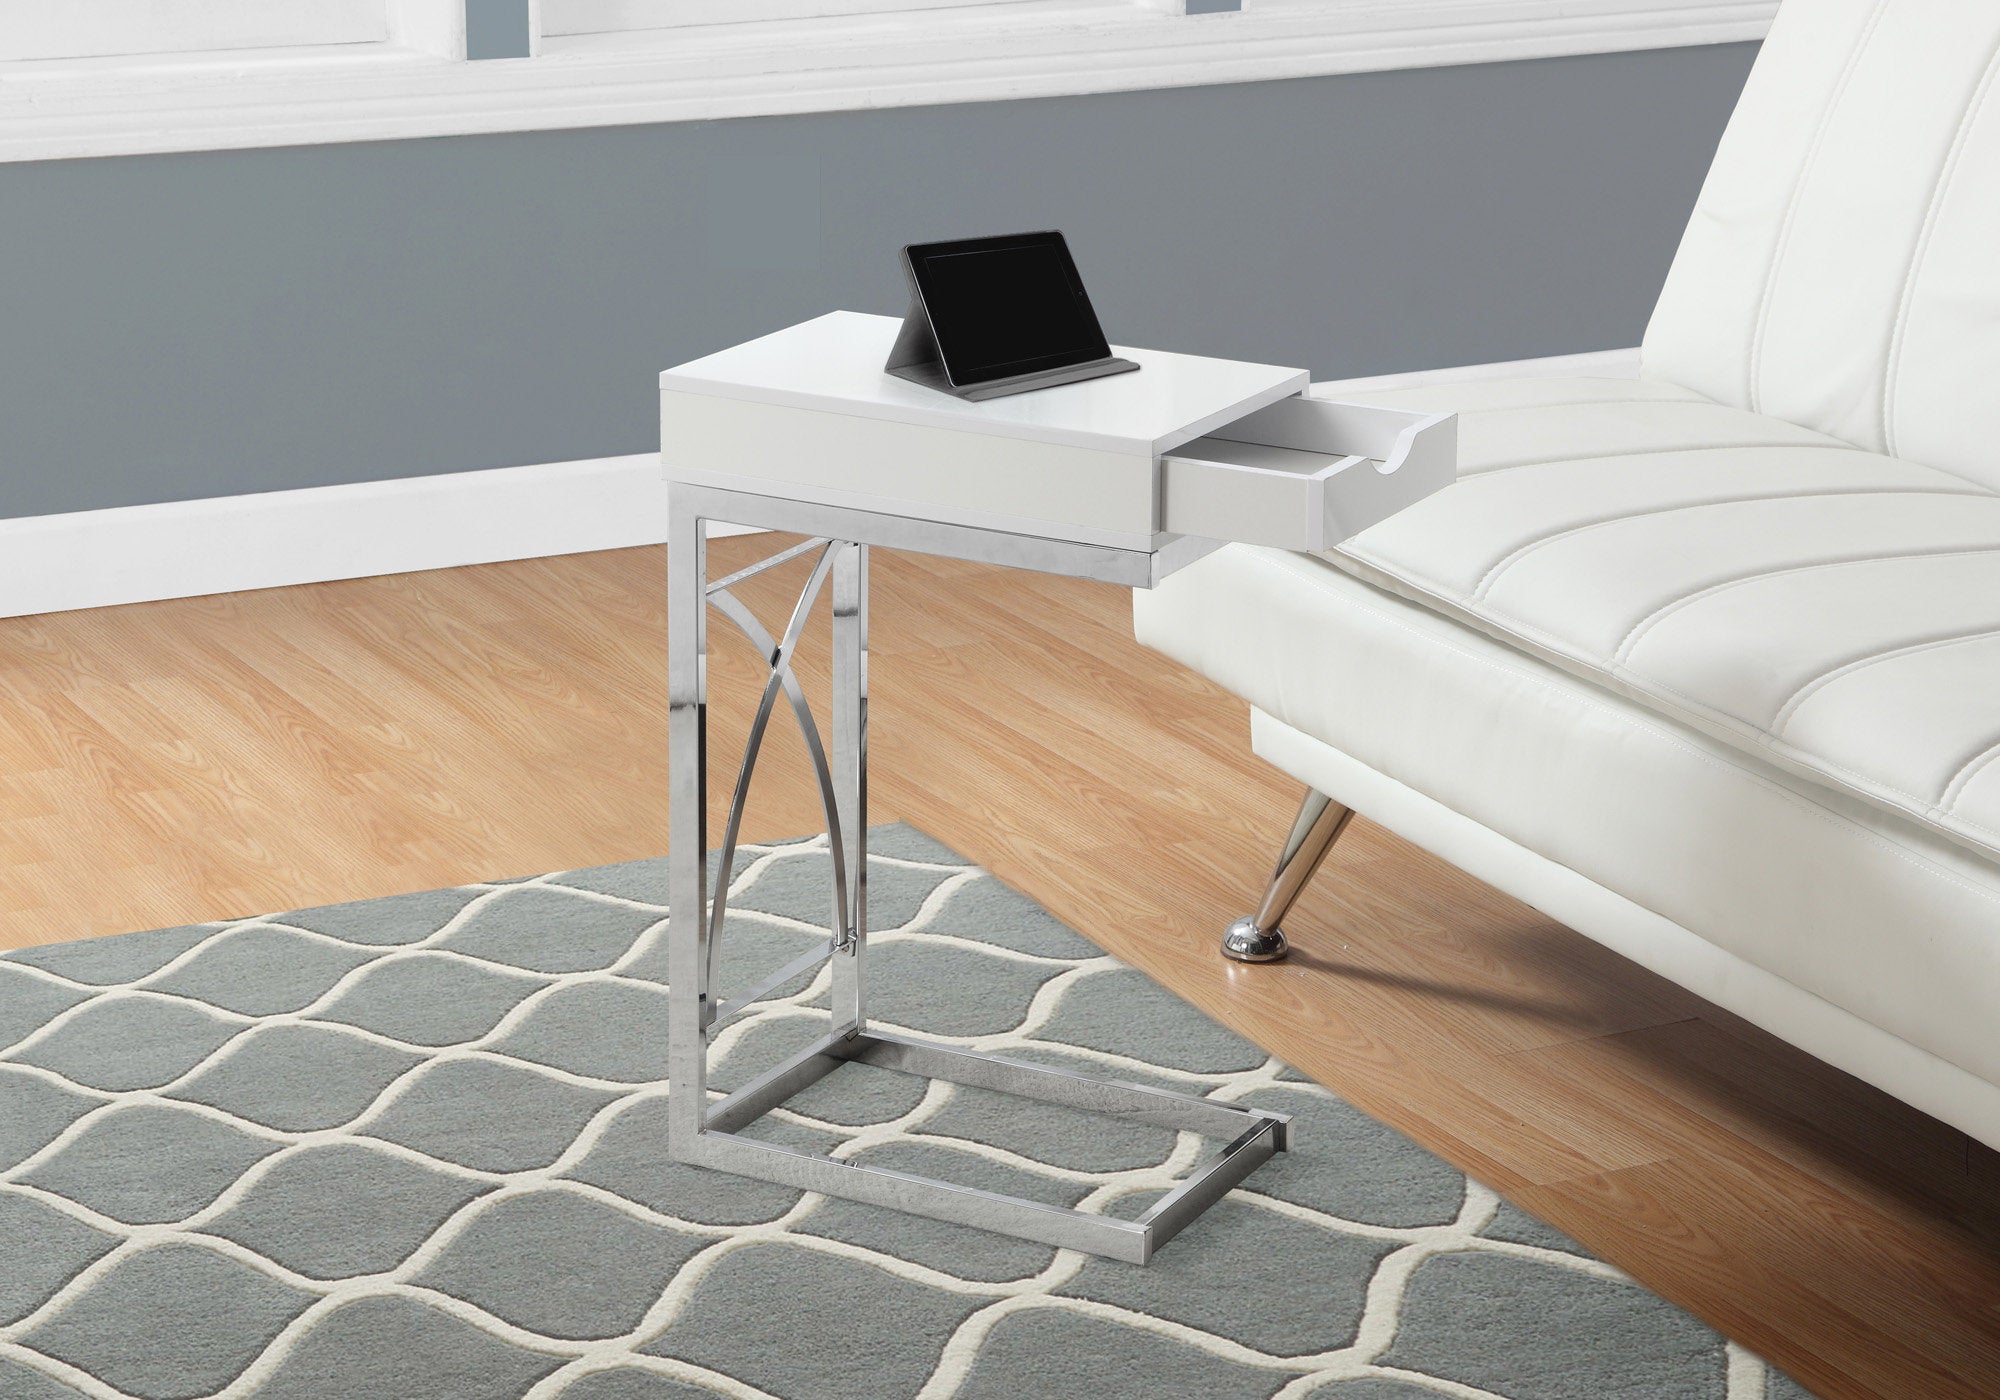 MN-553170    Accent Table, C-Shaped, End, Side, Snack, Living Room, Bedroom, Storage Drawer, Metal Legs, Laminate, Glossy White, Chrome, Contemporary, Modern